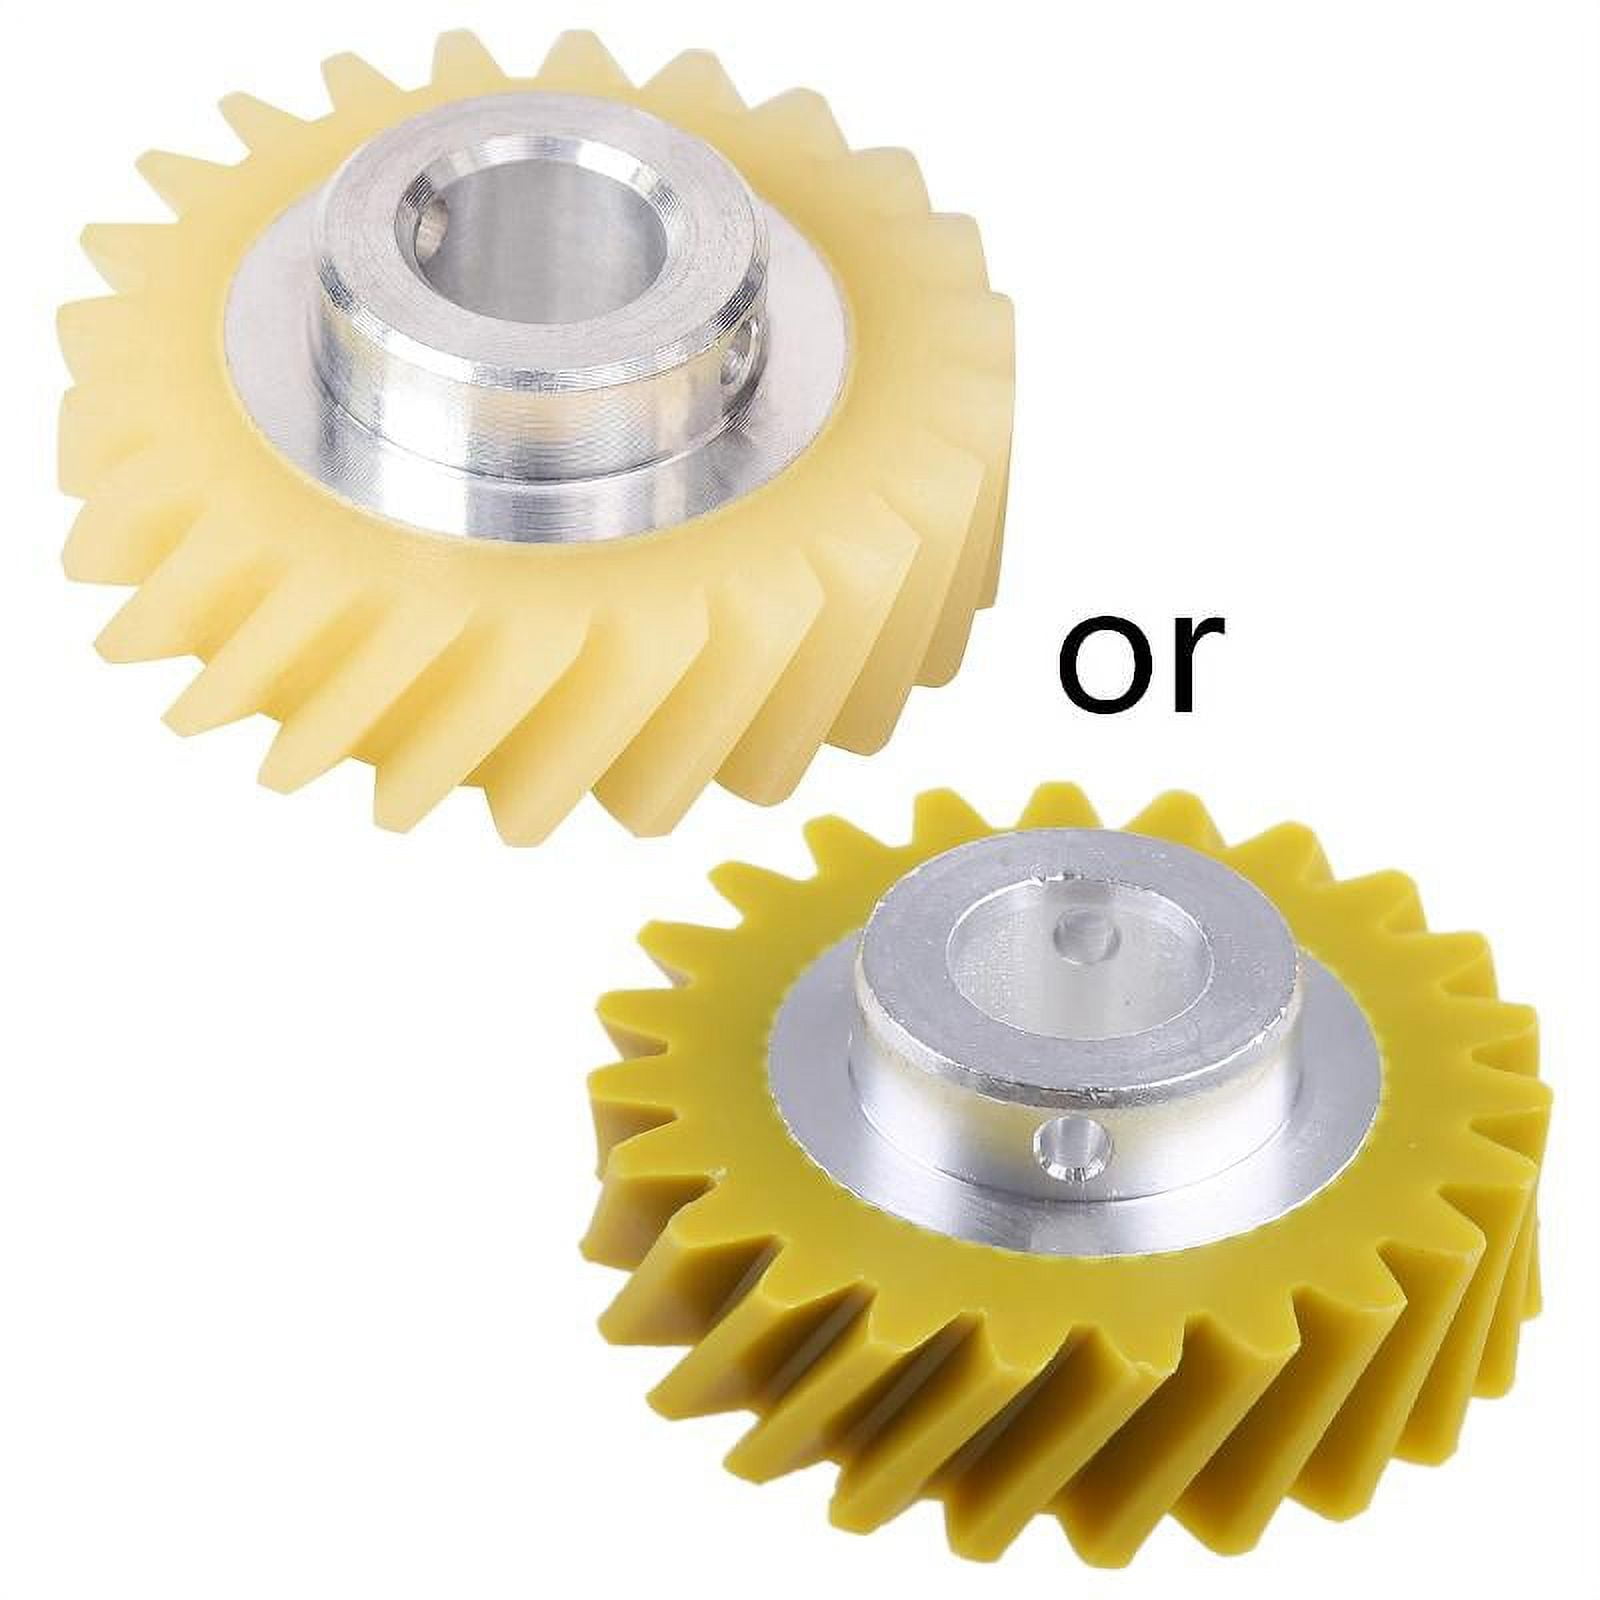 How to replace a stand mixer worm gear